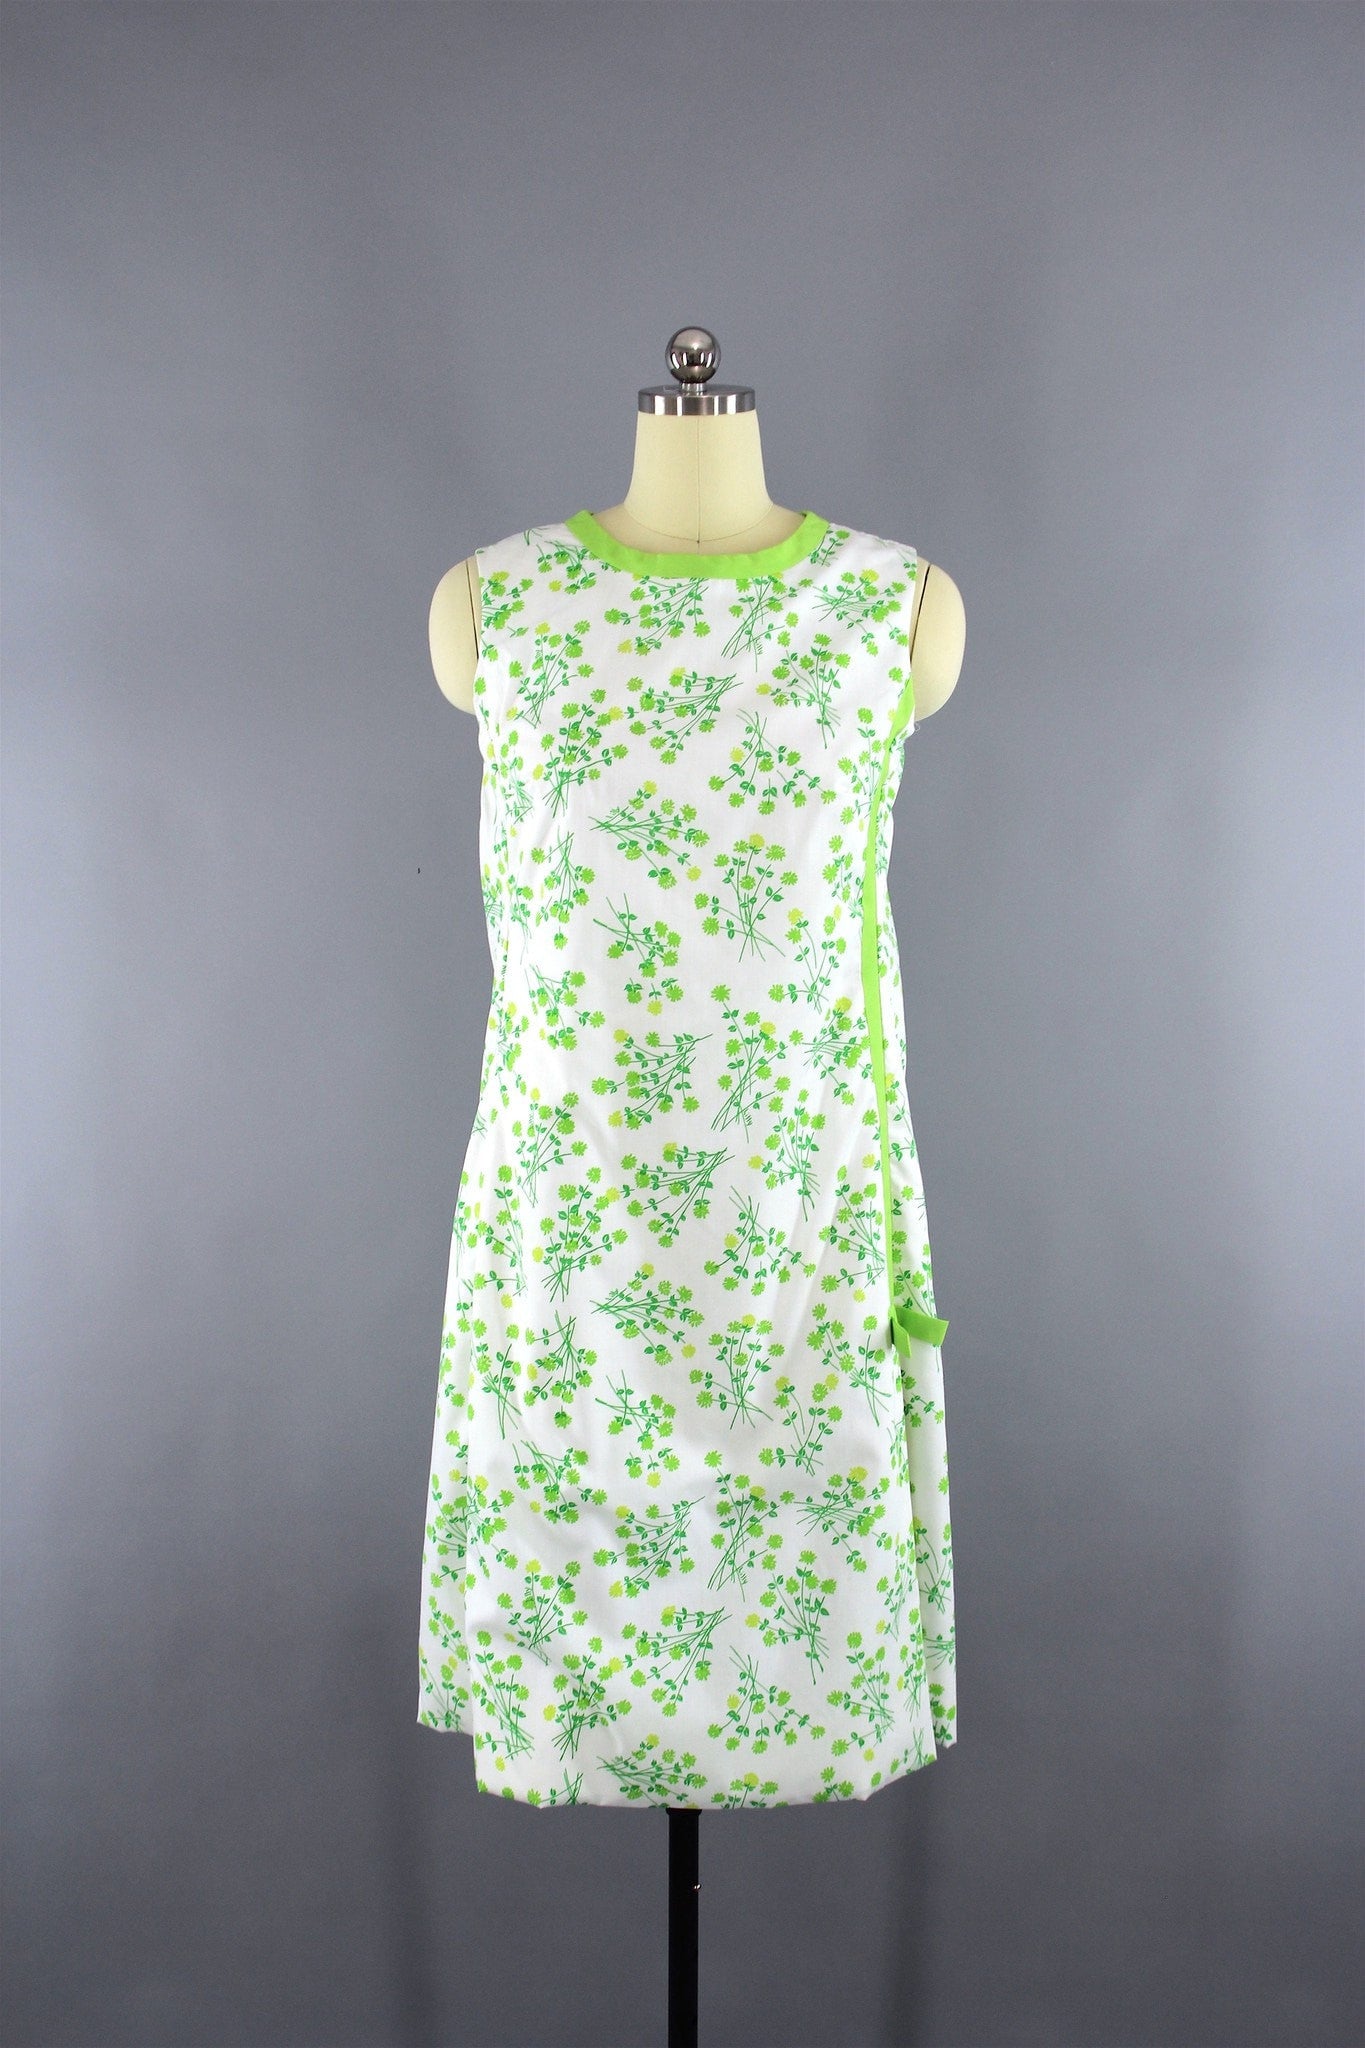 Vintage 1960s Green Floral Print Lilly Pulitzer Dress - ThisBlueBird